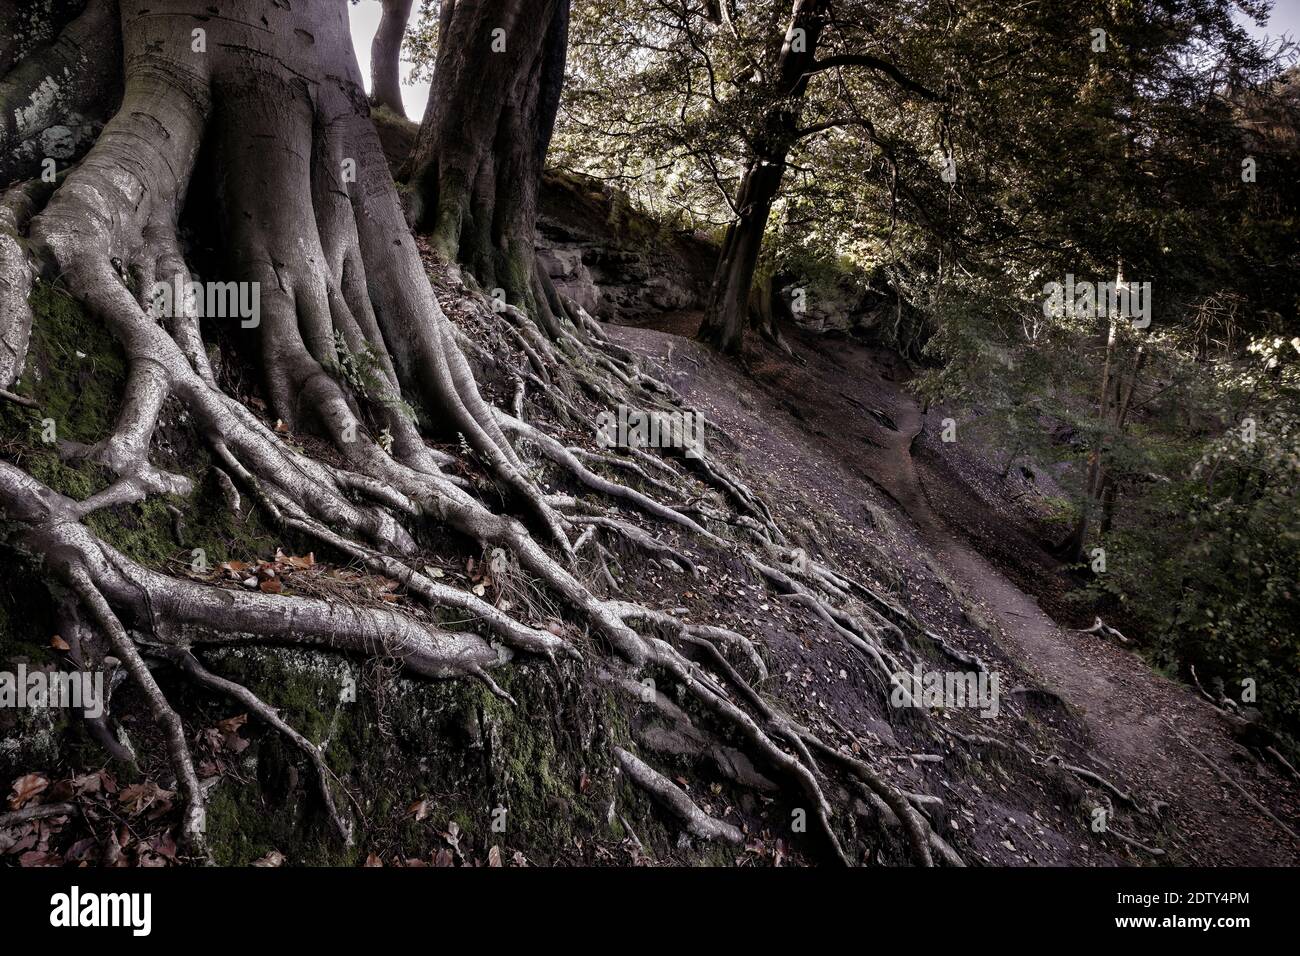 Beech Tree Roots and Crags above Footpath, Alderley Edge, Cheshire, Angleterre, Royaume-Uni Banque D'Images